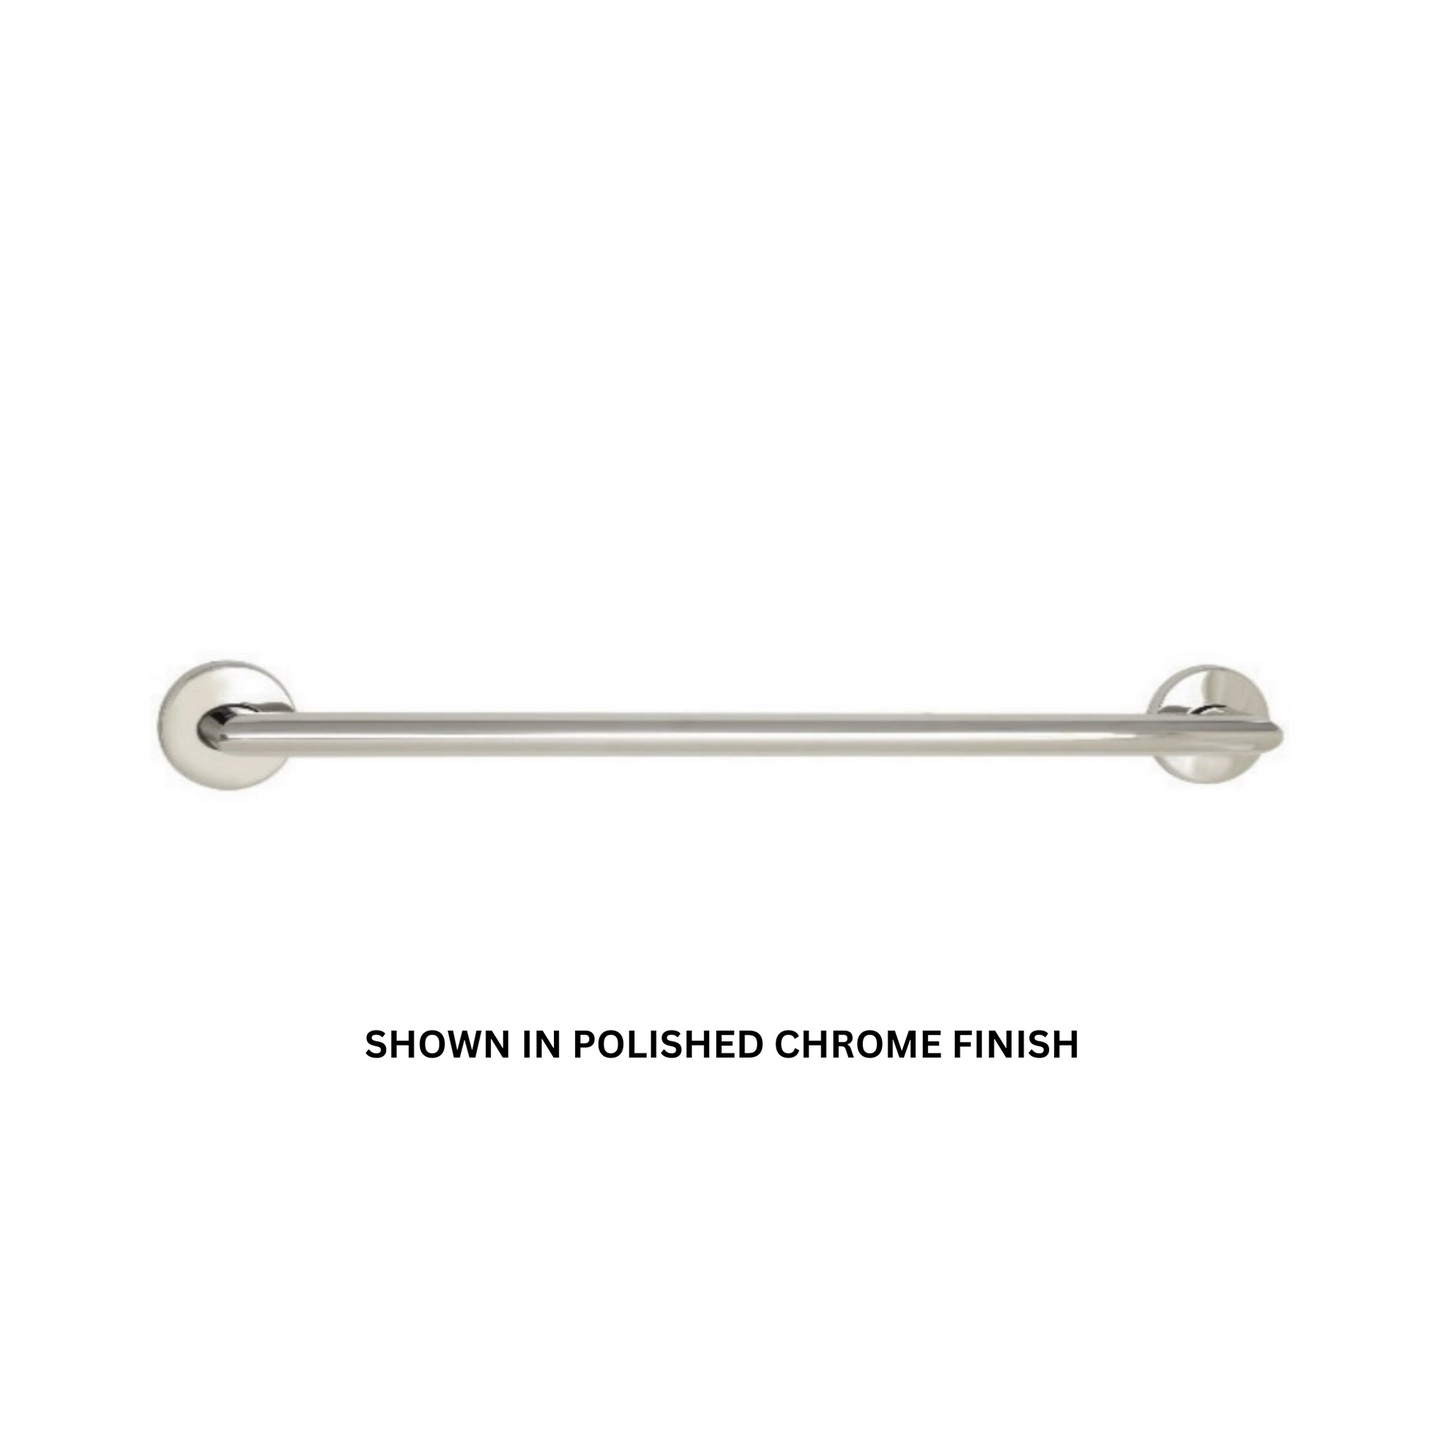 Seachrome Coronado 12" Almond Powder Coat 1.5" Concealed Flanges Oval Grab Bar With Mitered Corners